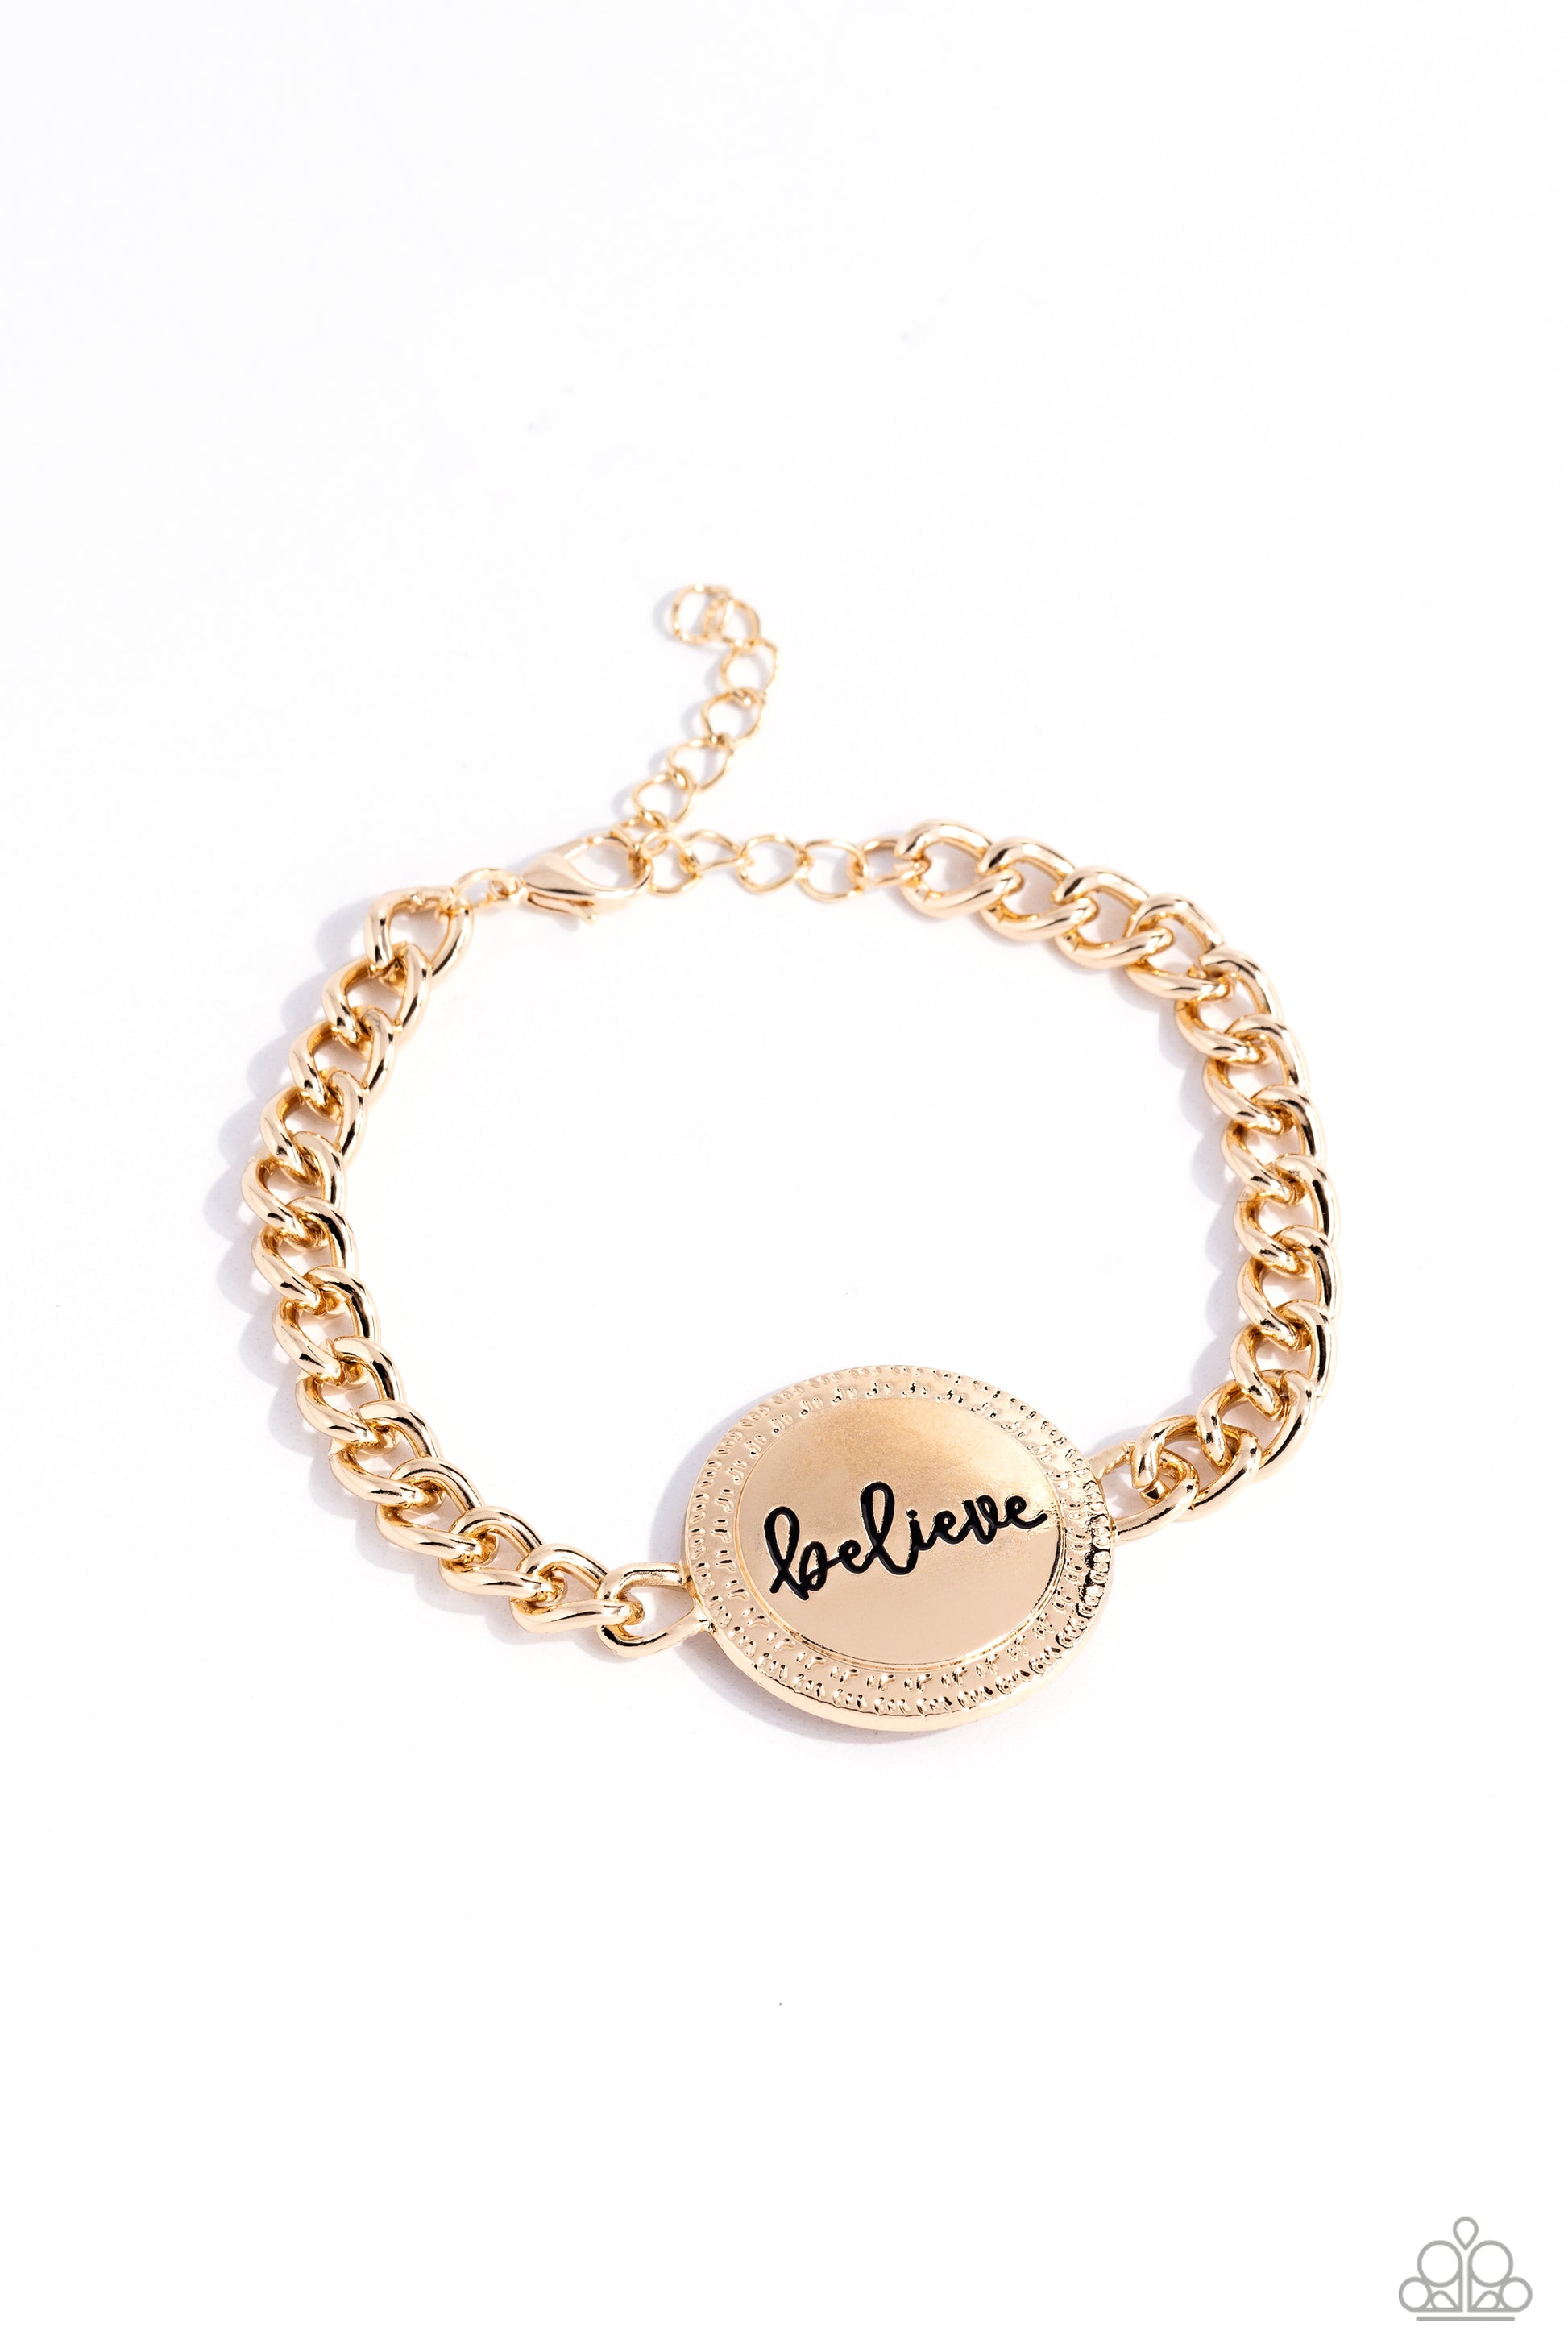 Hope and Faith Gold Believe Bracelet - Paparazzi Accessories  A gold disc is anchored at the center of a thick gold chain that wraps around the wrist. The word "believe" is etched into the center of the gold disc in a fancy script as a textured border decorates the edge. Features an adjustable clasp closure.  Sold as one individual bracelet.  Sku:  P9WD-GDXX-179XX